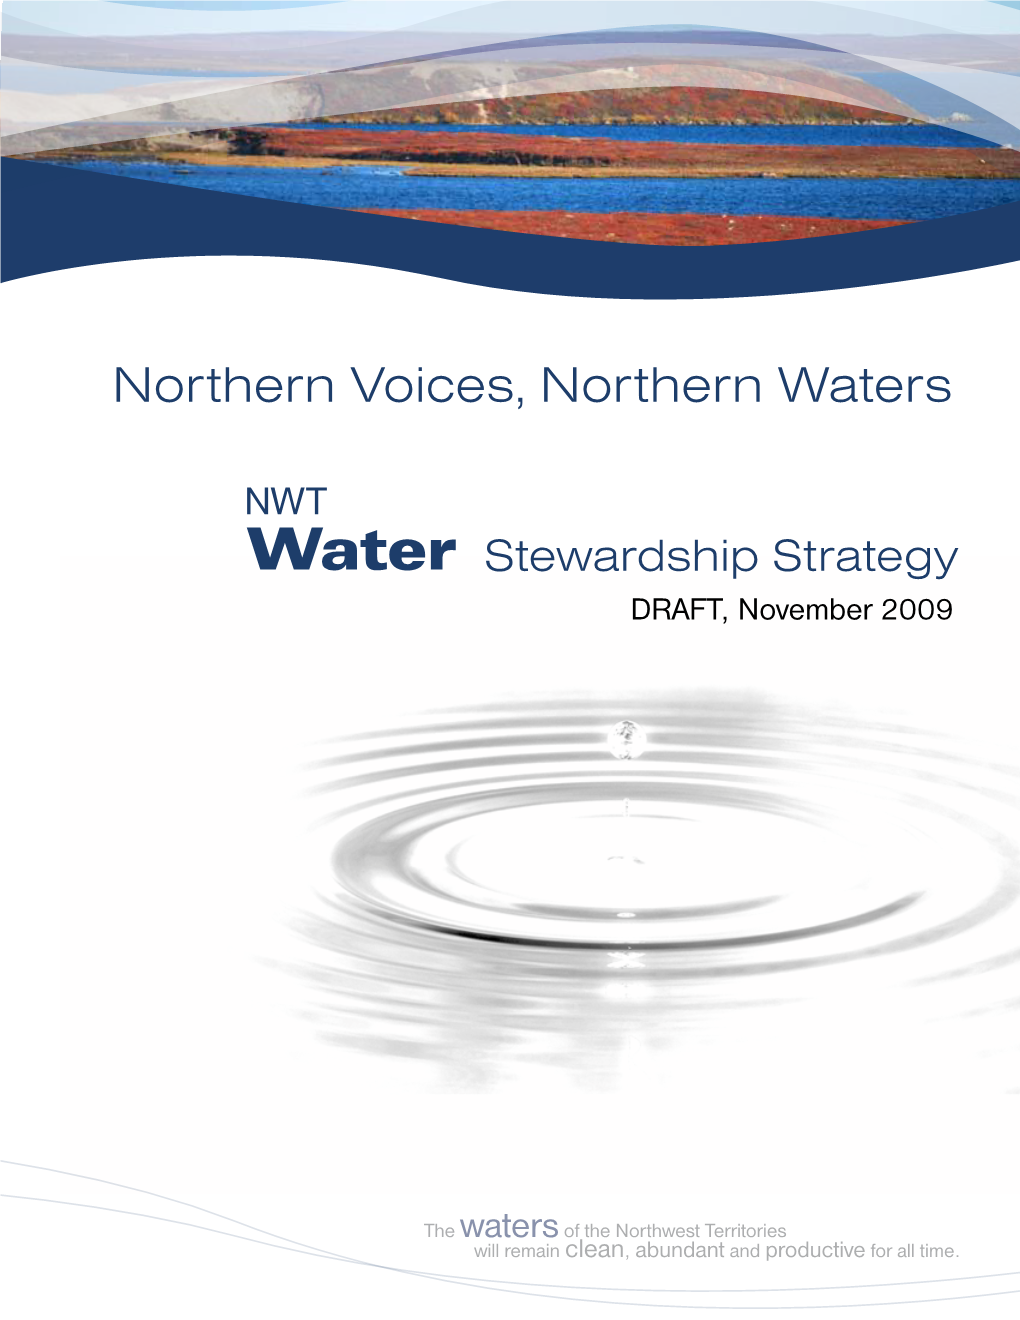 Draft NWT Water Stewardship Strategy (The Strategy) to Ensure the Waters of the NWT Remain Clean, Abundant and Productive for All Time